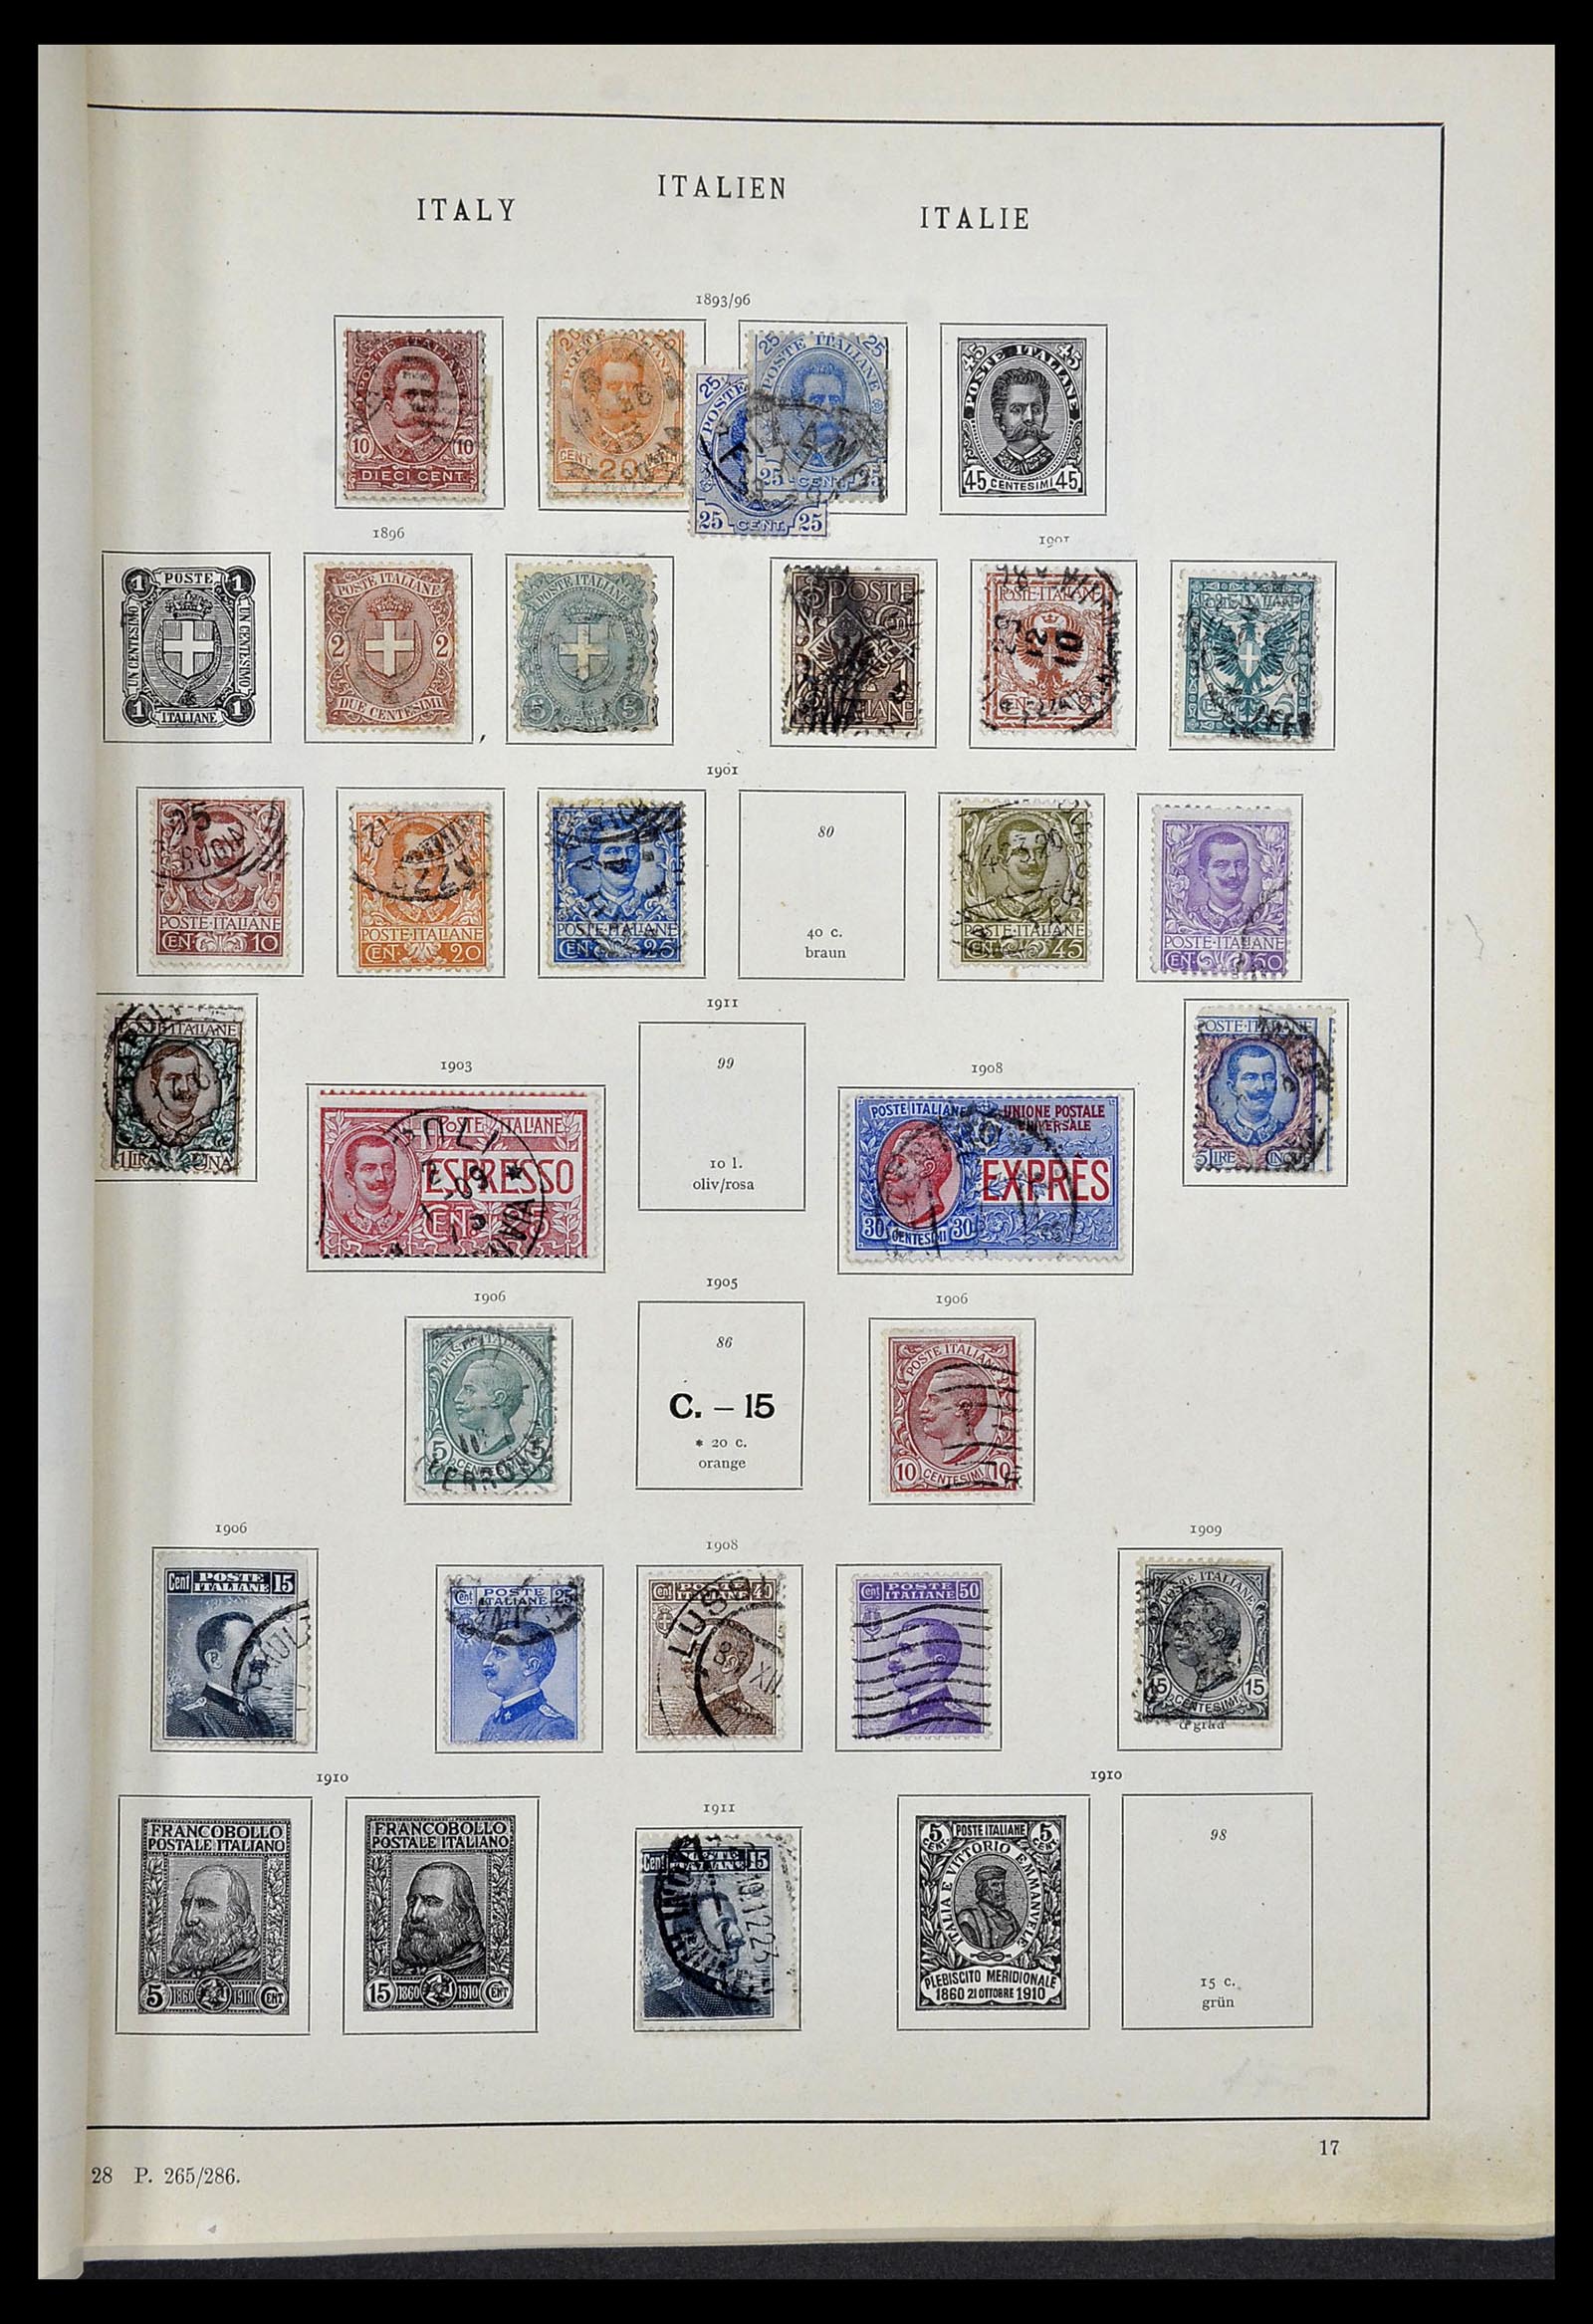 33619 005 - Stamp collection 33619 Italian territories/occupation/colonies 1874-1945